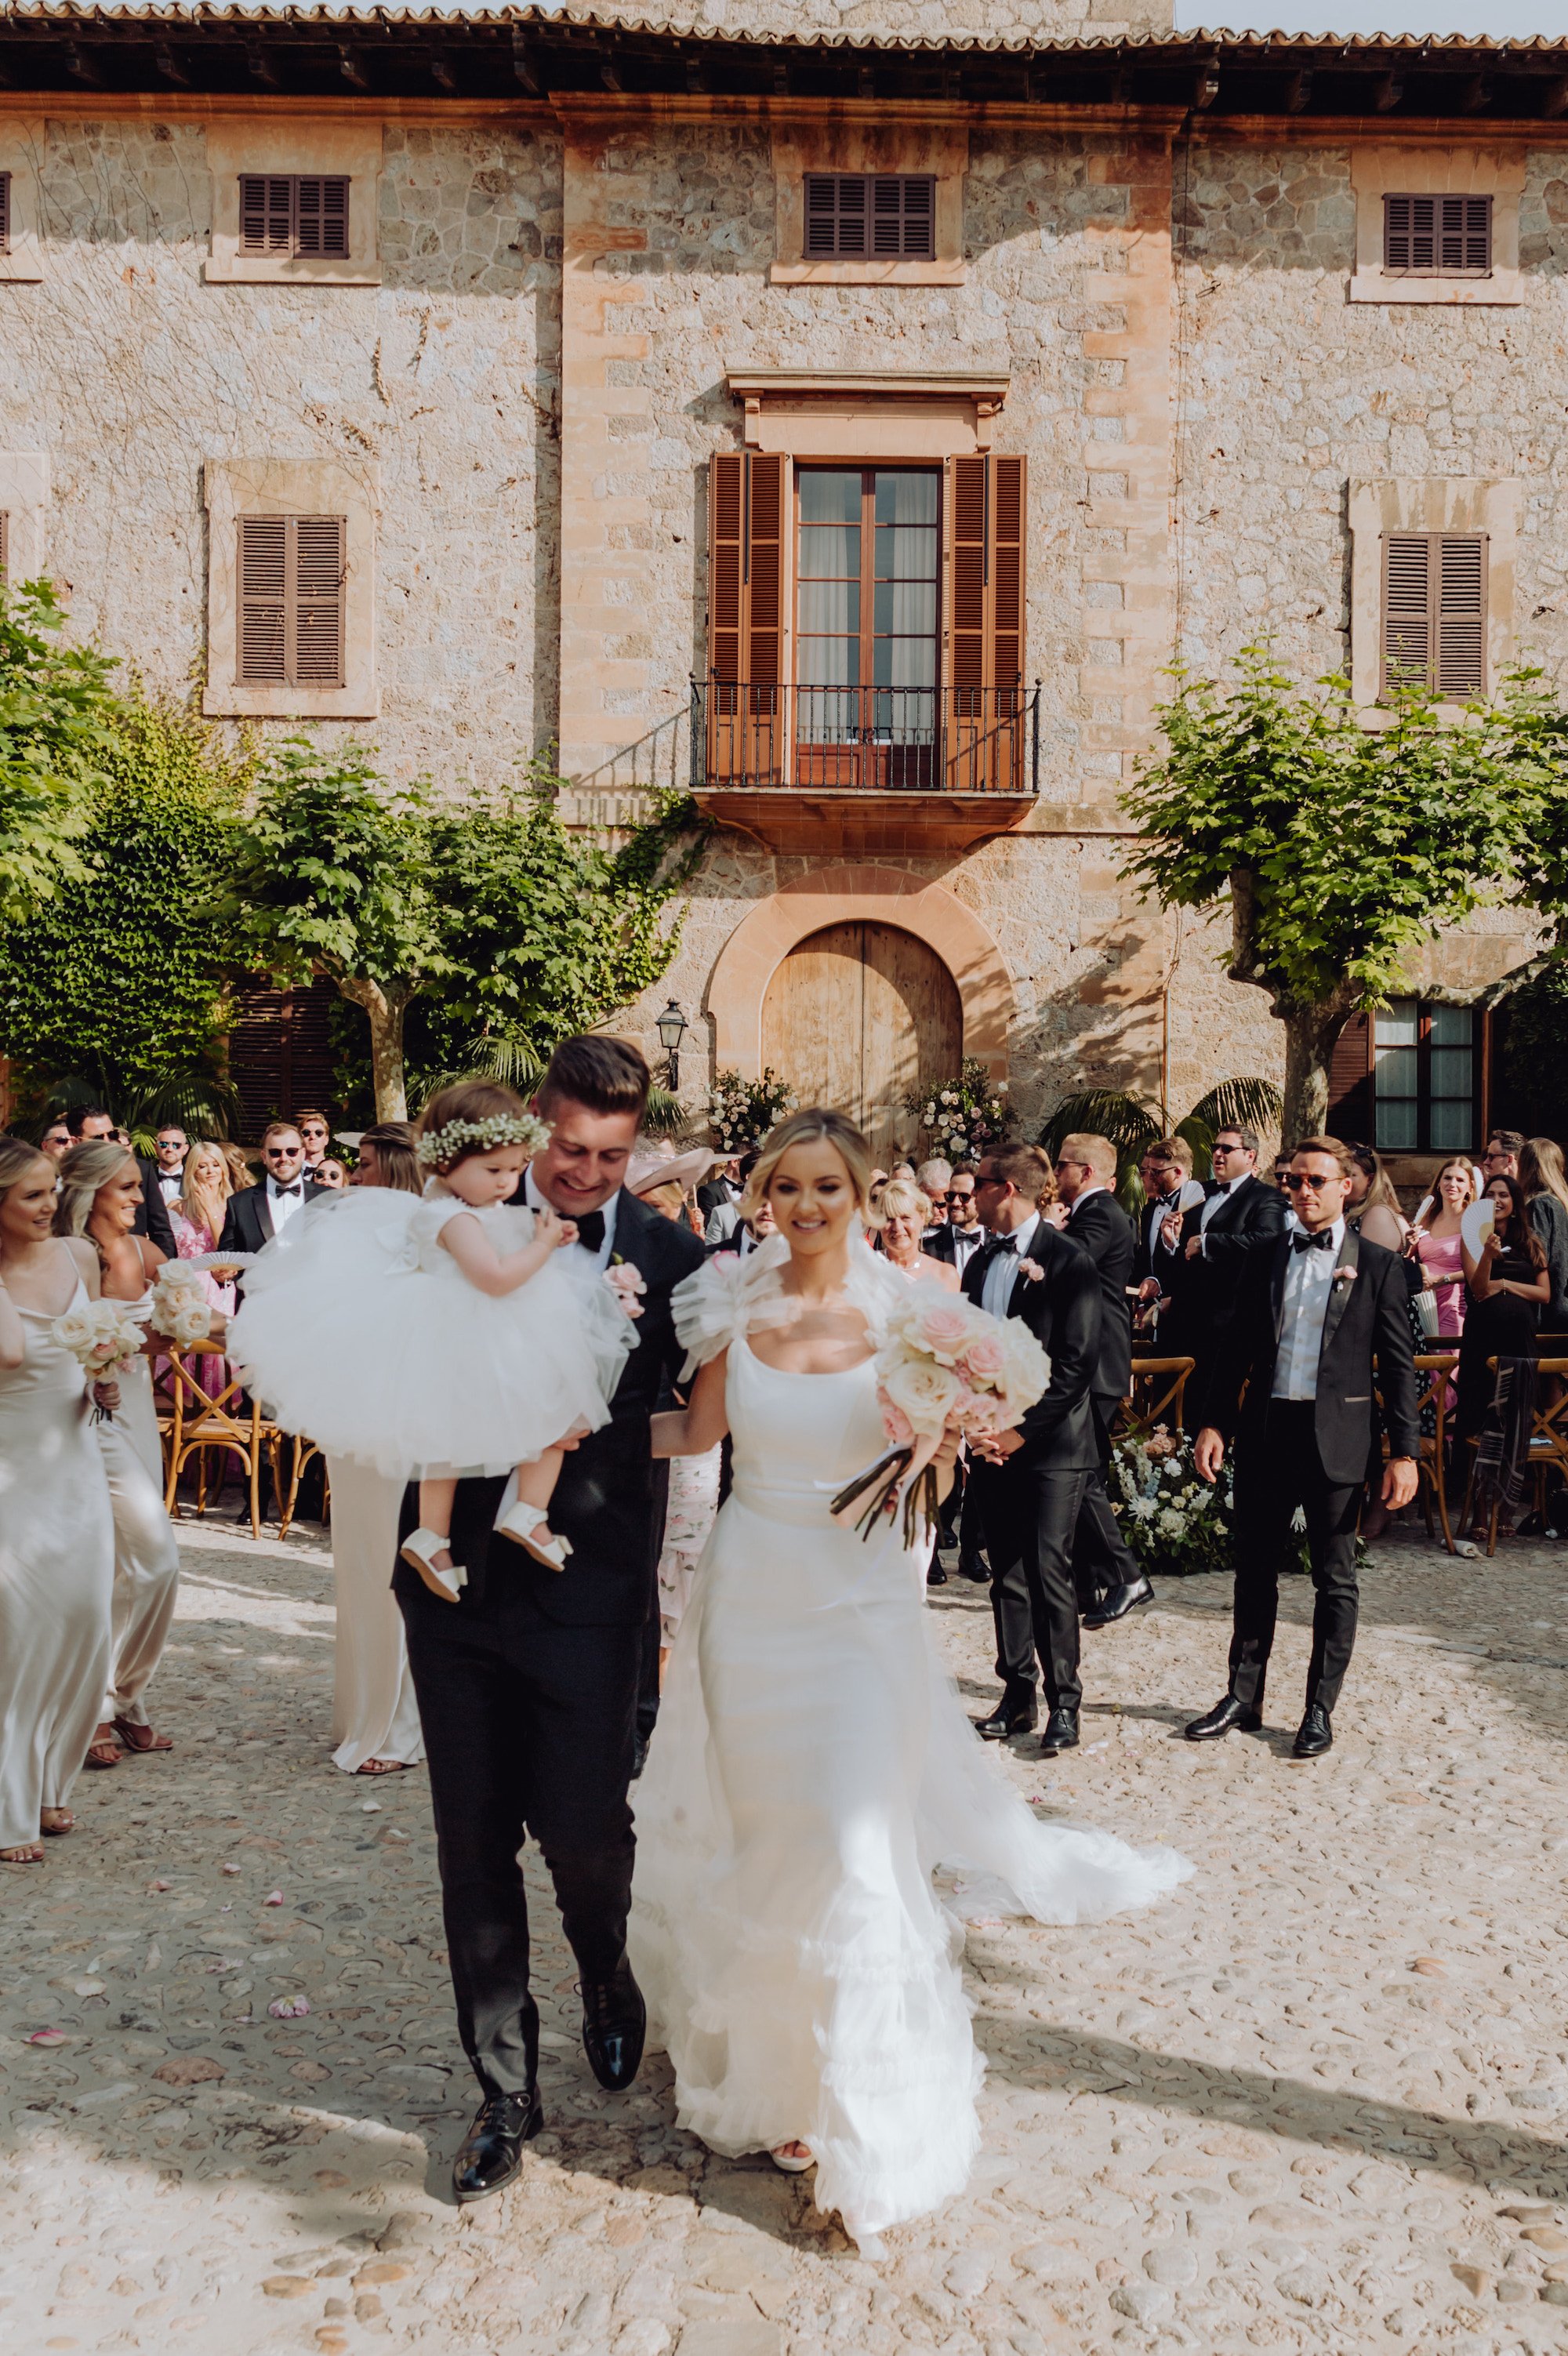 Beautiful bride Rebecca wears the Mayfair dress with detachable Mayfair skirt for her Wedding | Wedding dresses by Halfpenny London